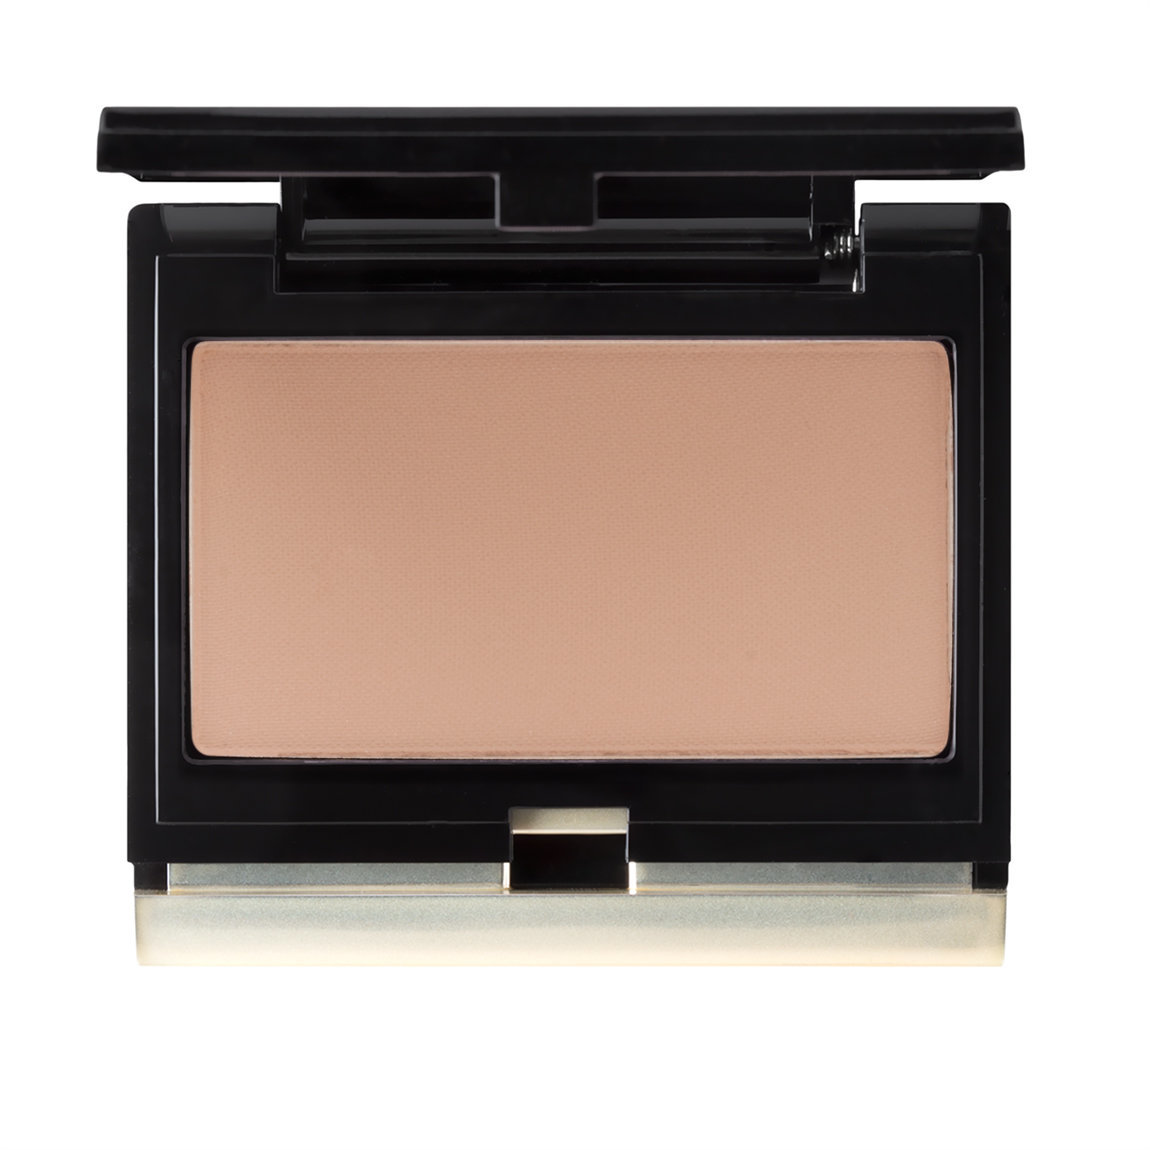 Kevyn Aucoin The Sculpting Powder Light alternative view 1 - product swatch.